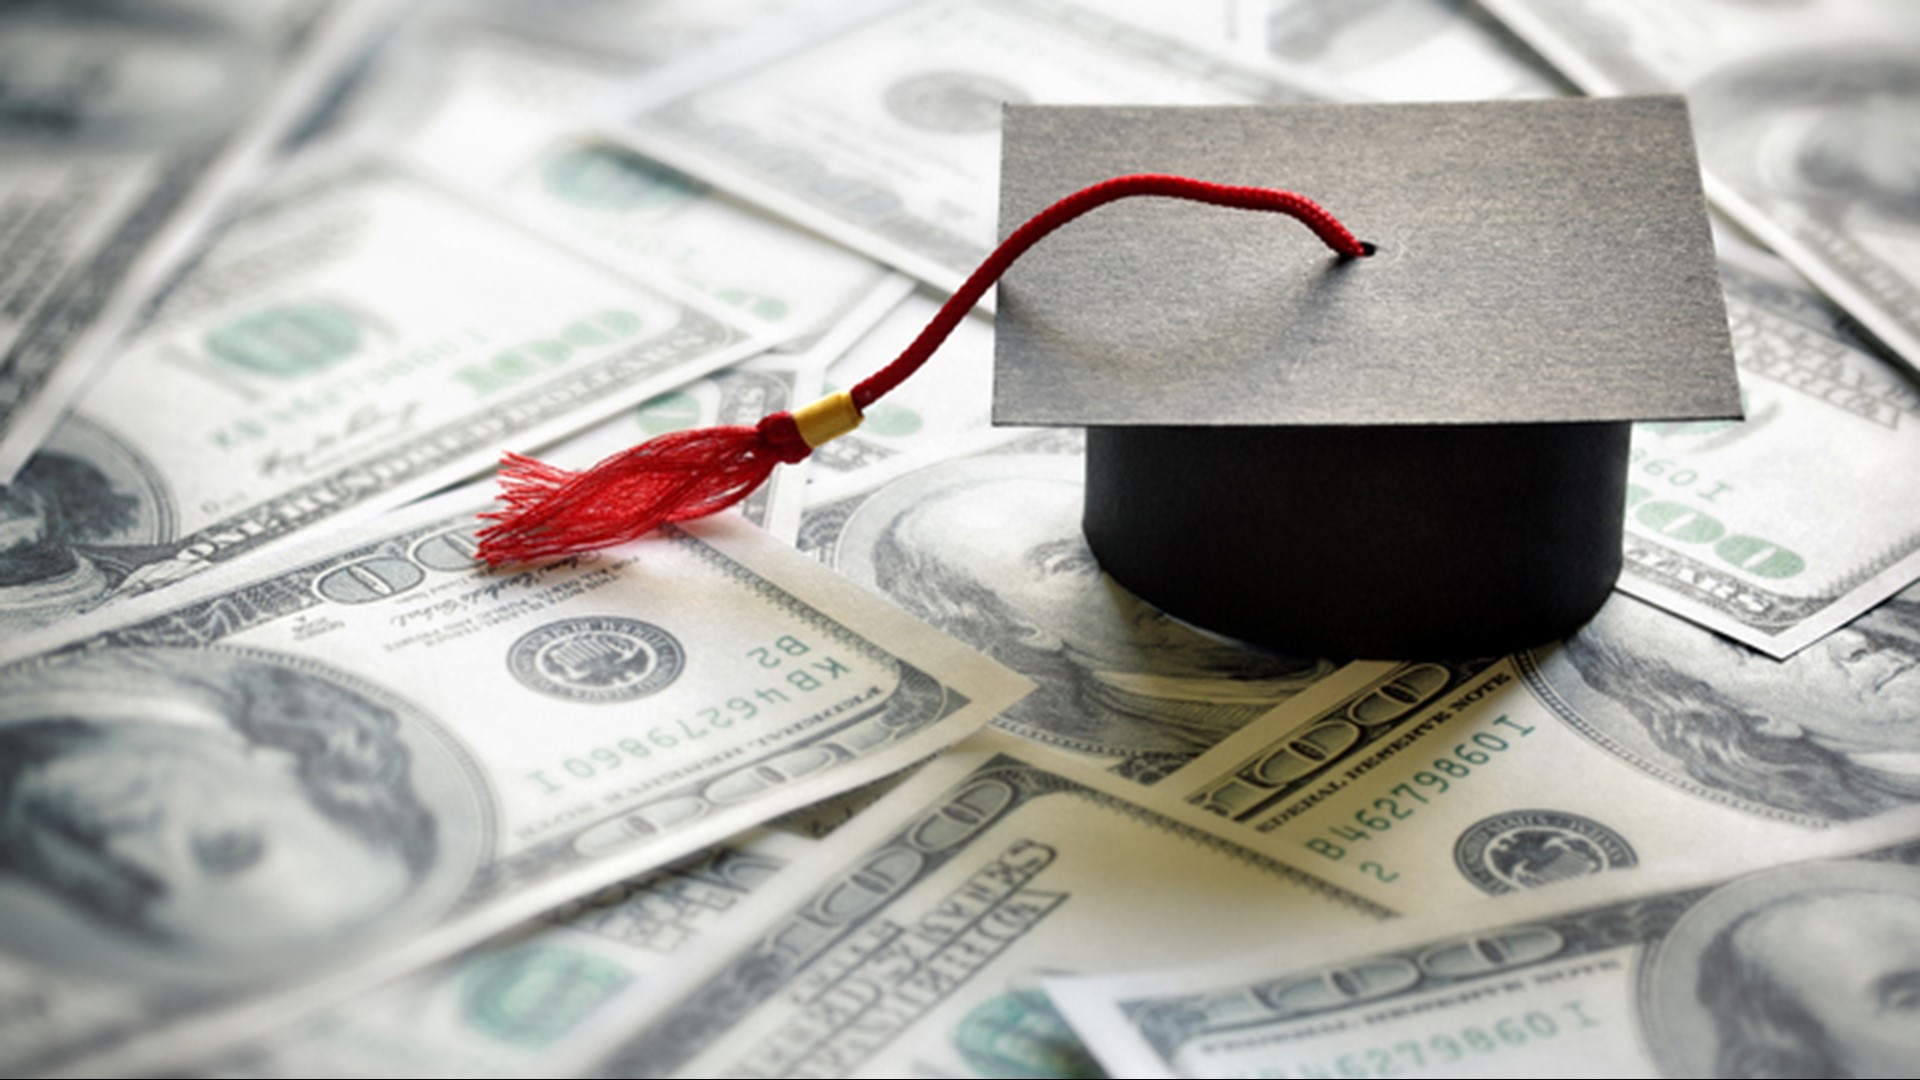 Yes, the proposed debt ceiling deal requires student loan payments to restart.